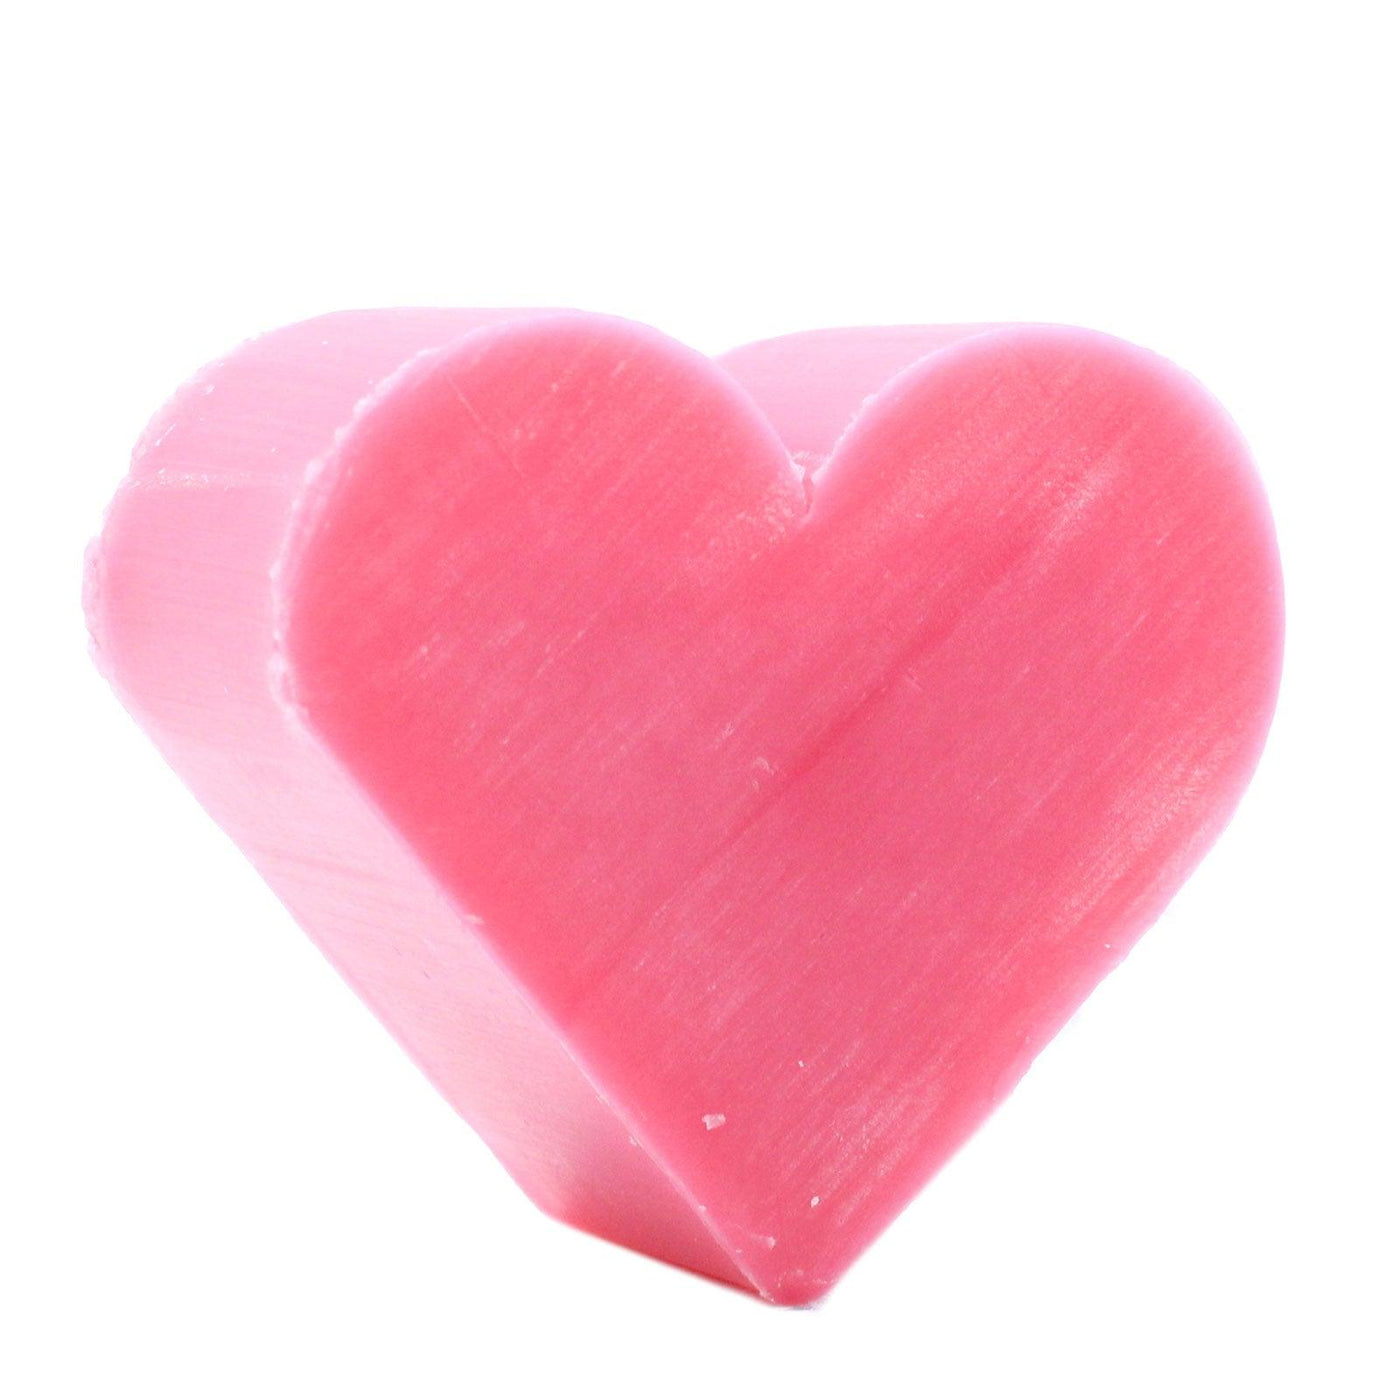 10x Pink Heart Shaped Paraben Free Guest Soap - Wild Rose.